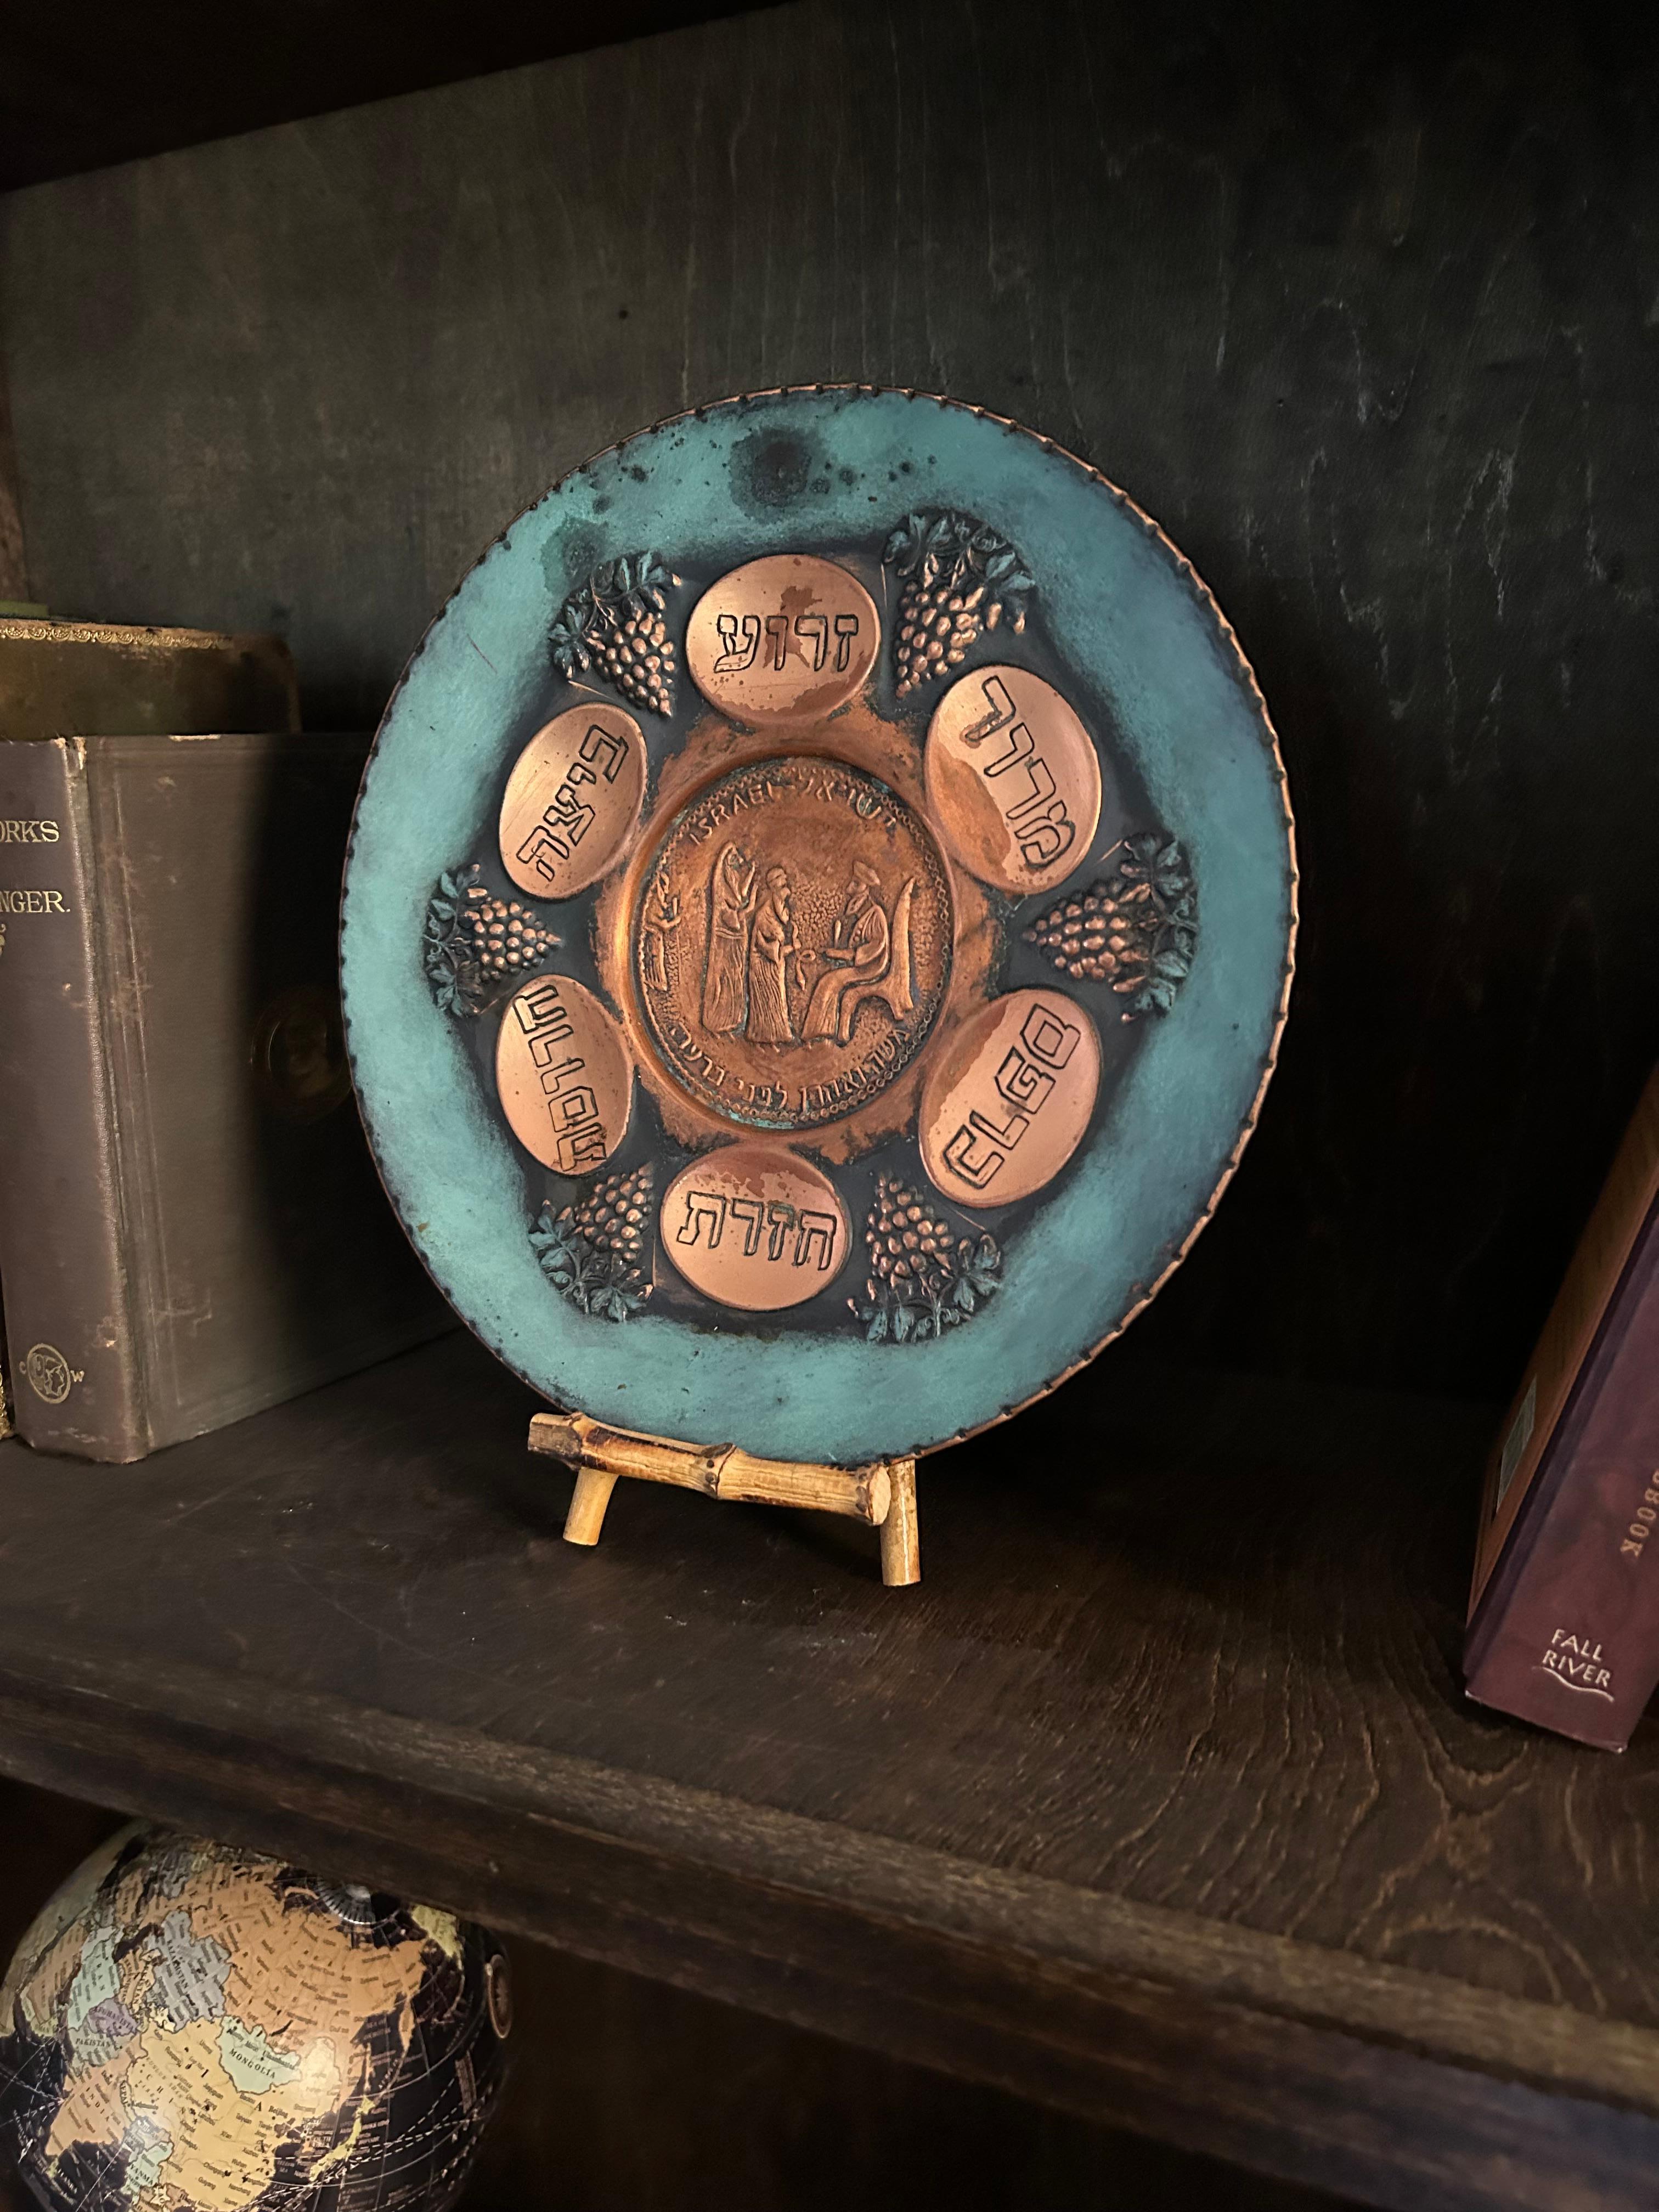 Vintage Judaica Passover Seder plate in copper and metal. The items for the plate are in Hebrew and are etched in. Grapes going around are raised. Center depicts Moses and Aaron before the Pharoah (states in Hebrew, Moshe veAharon lephnai Paroh) and